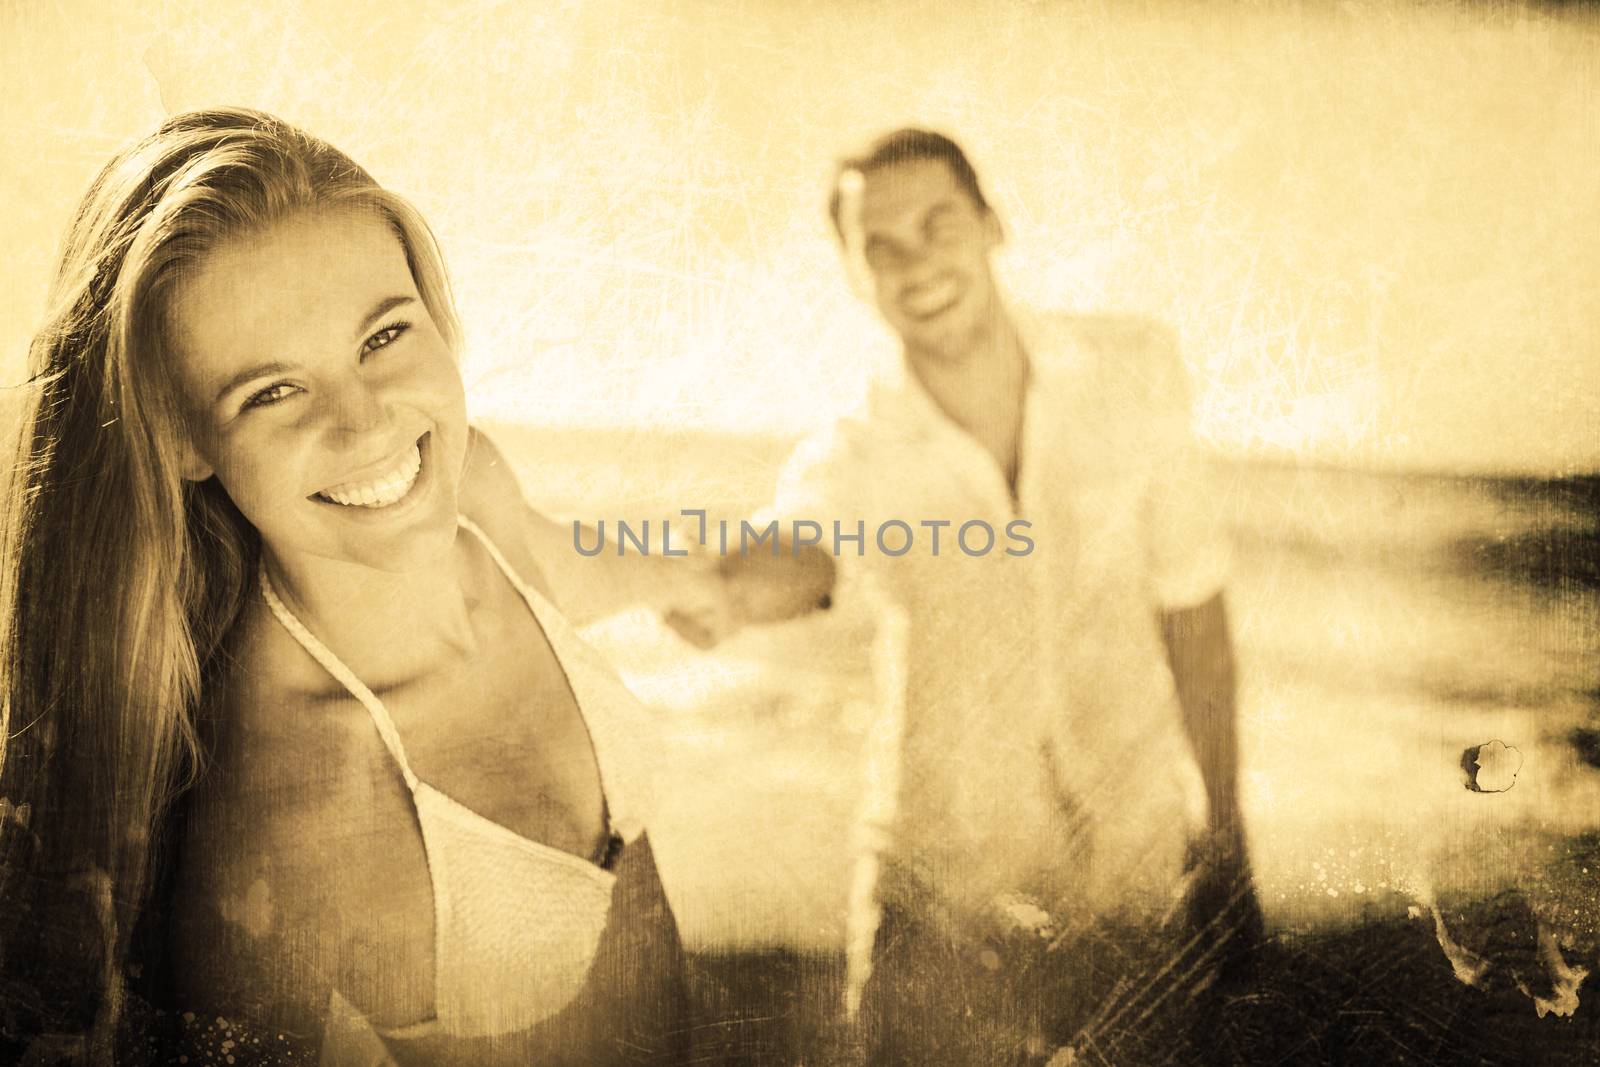 Pretty woman smiling at camera with boyfriend holding her hand against grey background